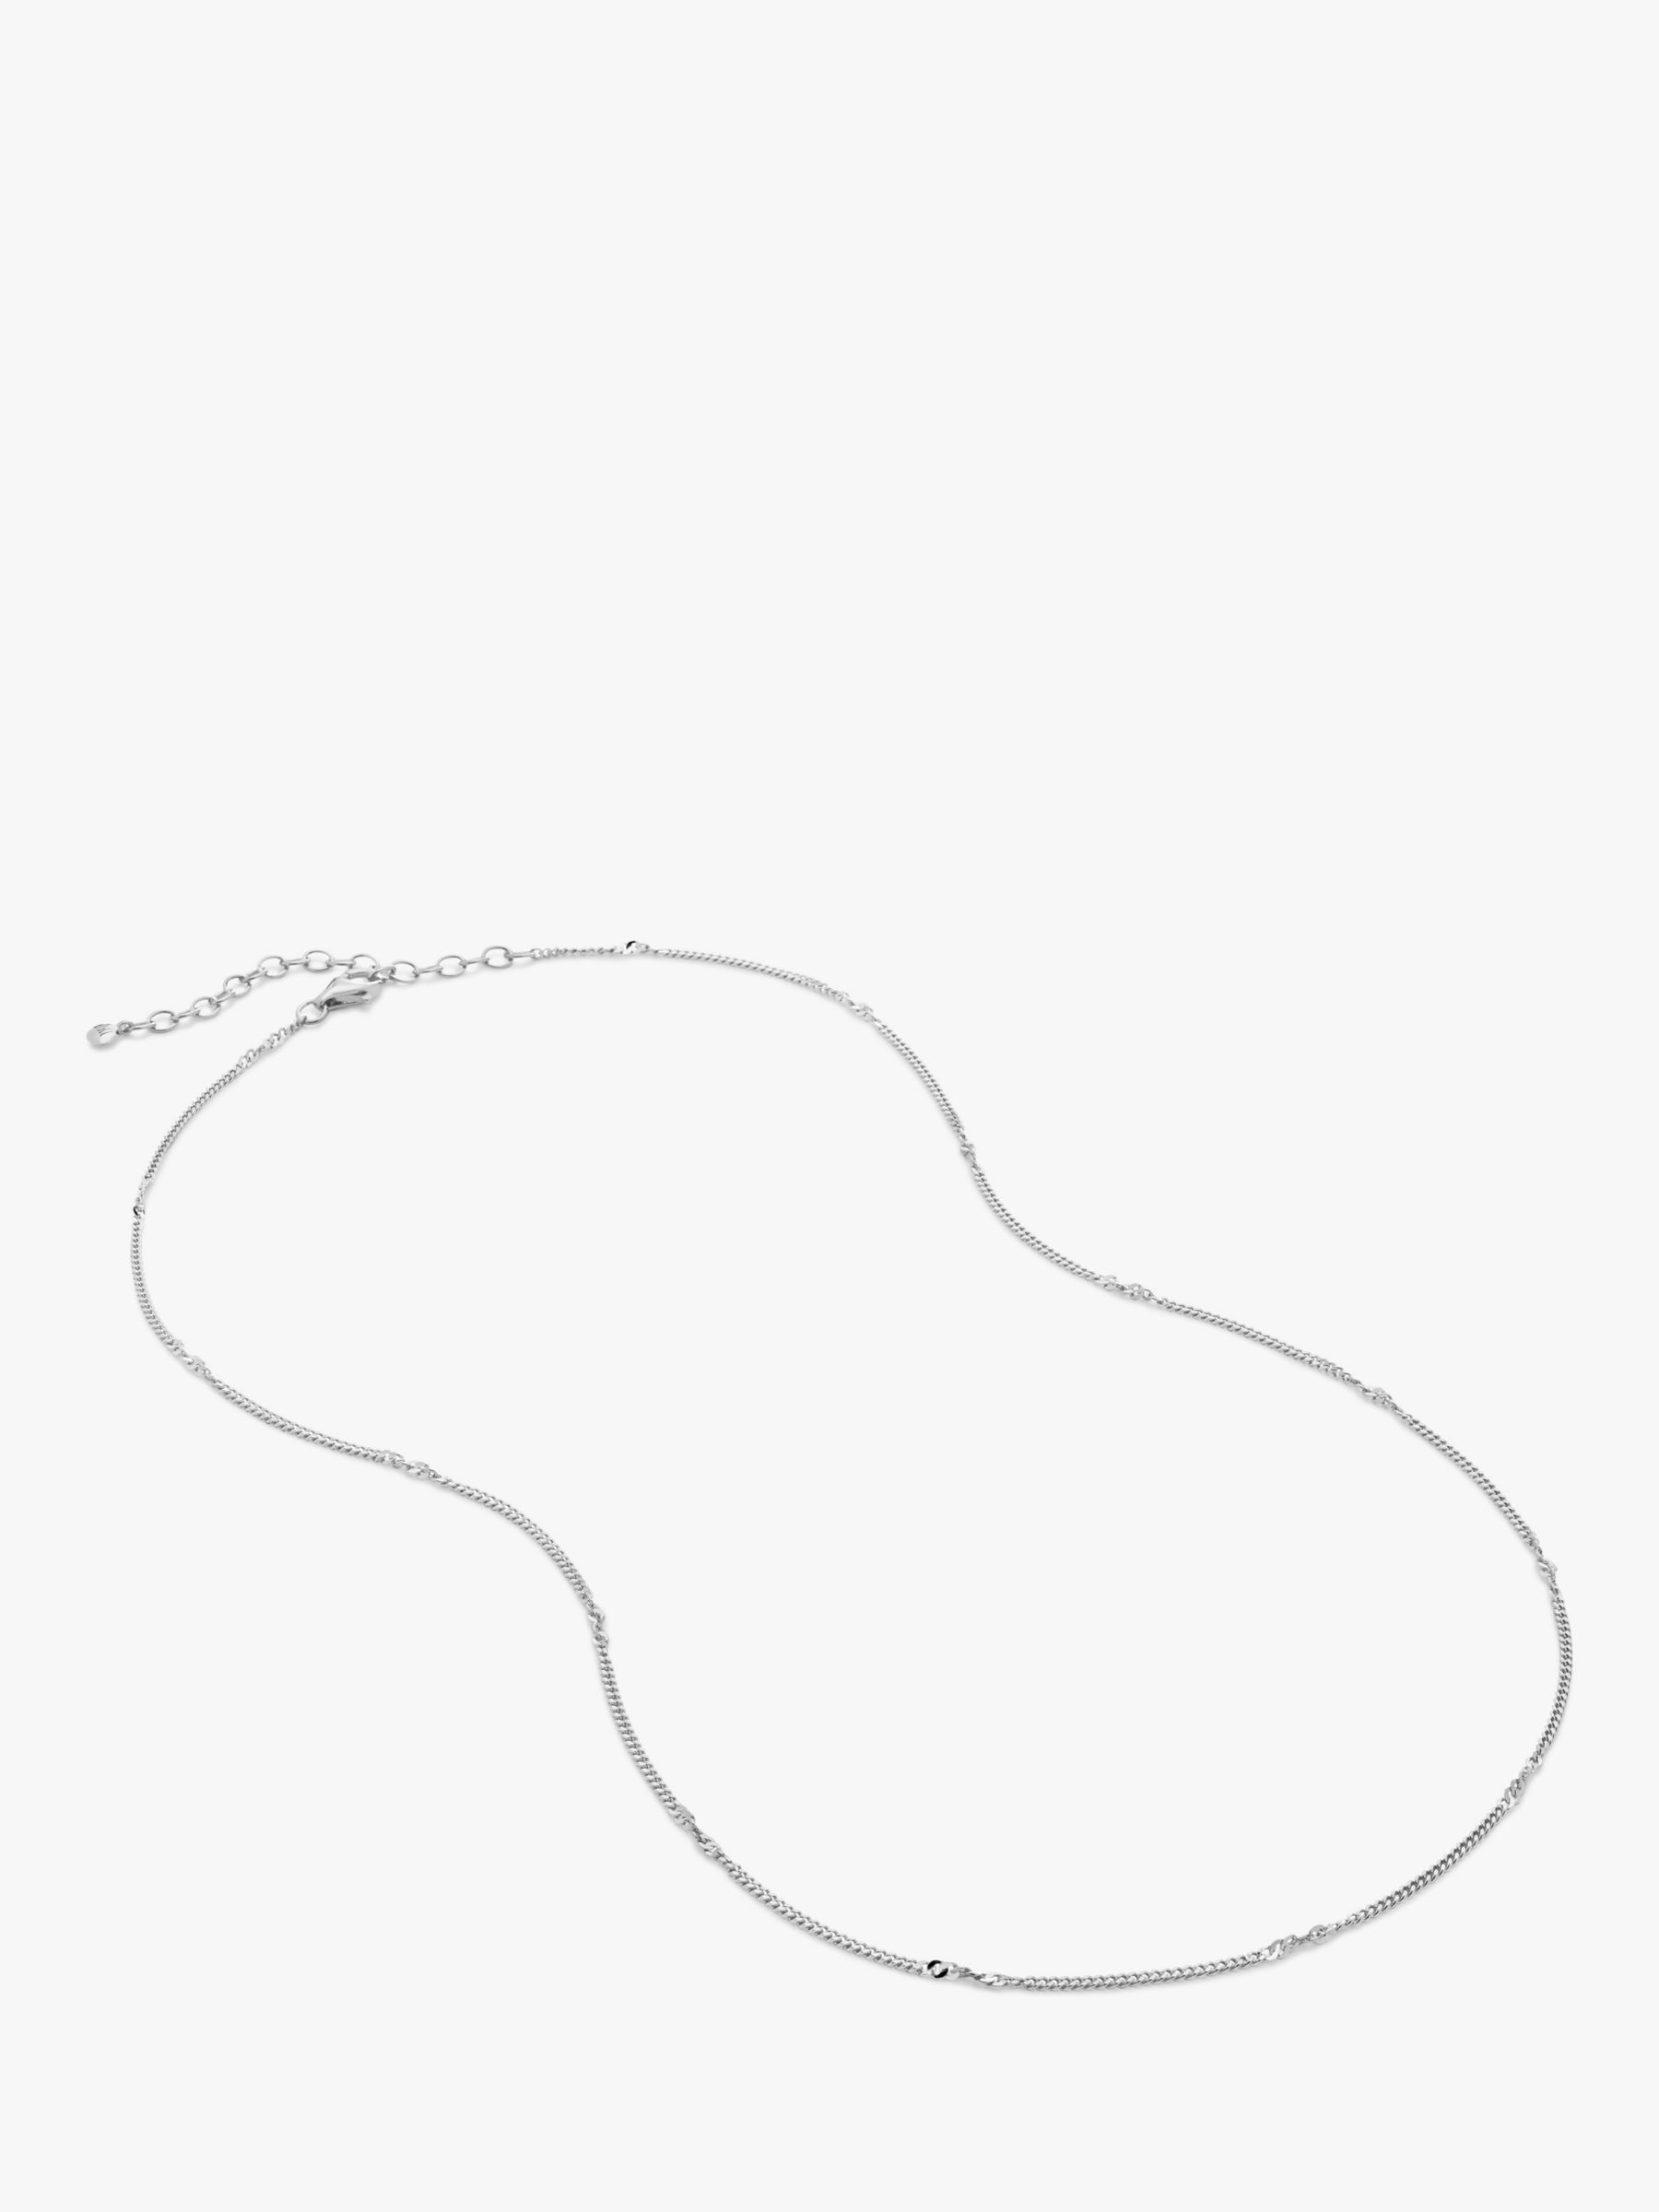 Monica Vinader Curb Twist Necklace, Silver at John Lewis & Partners